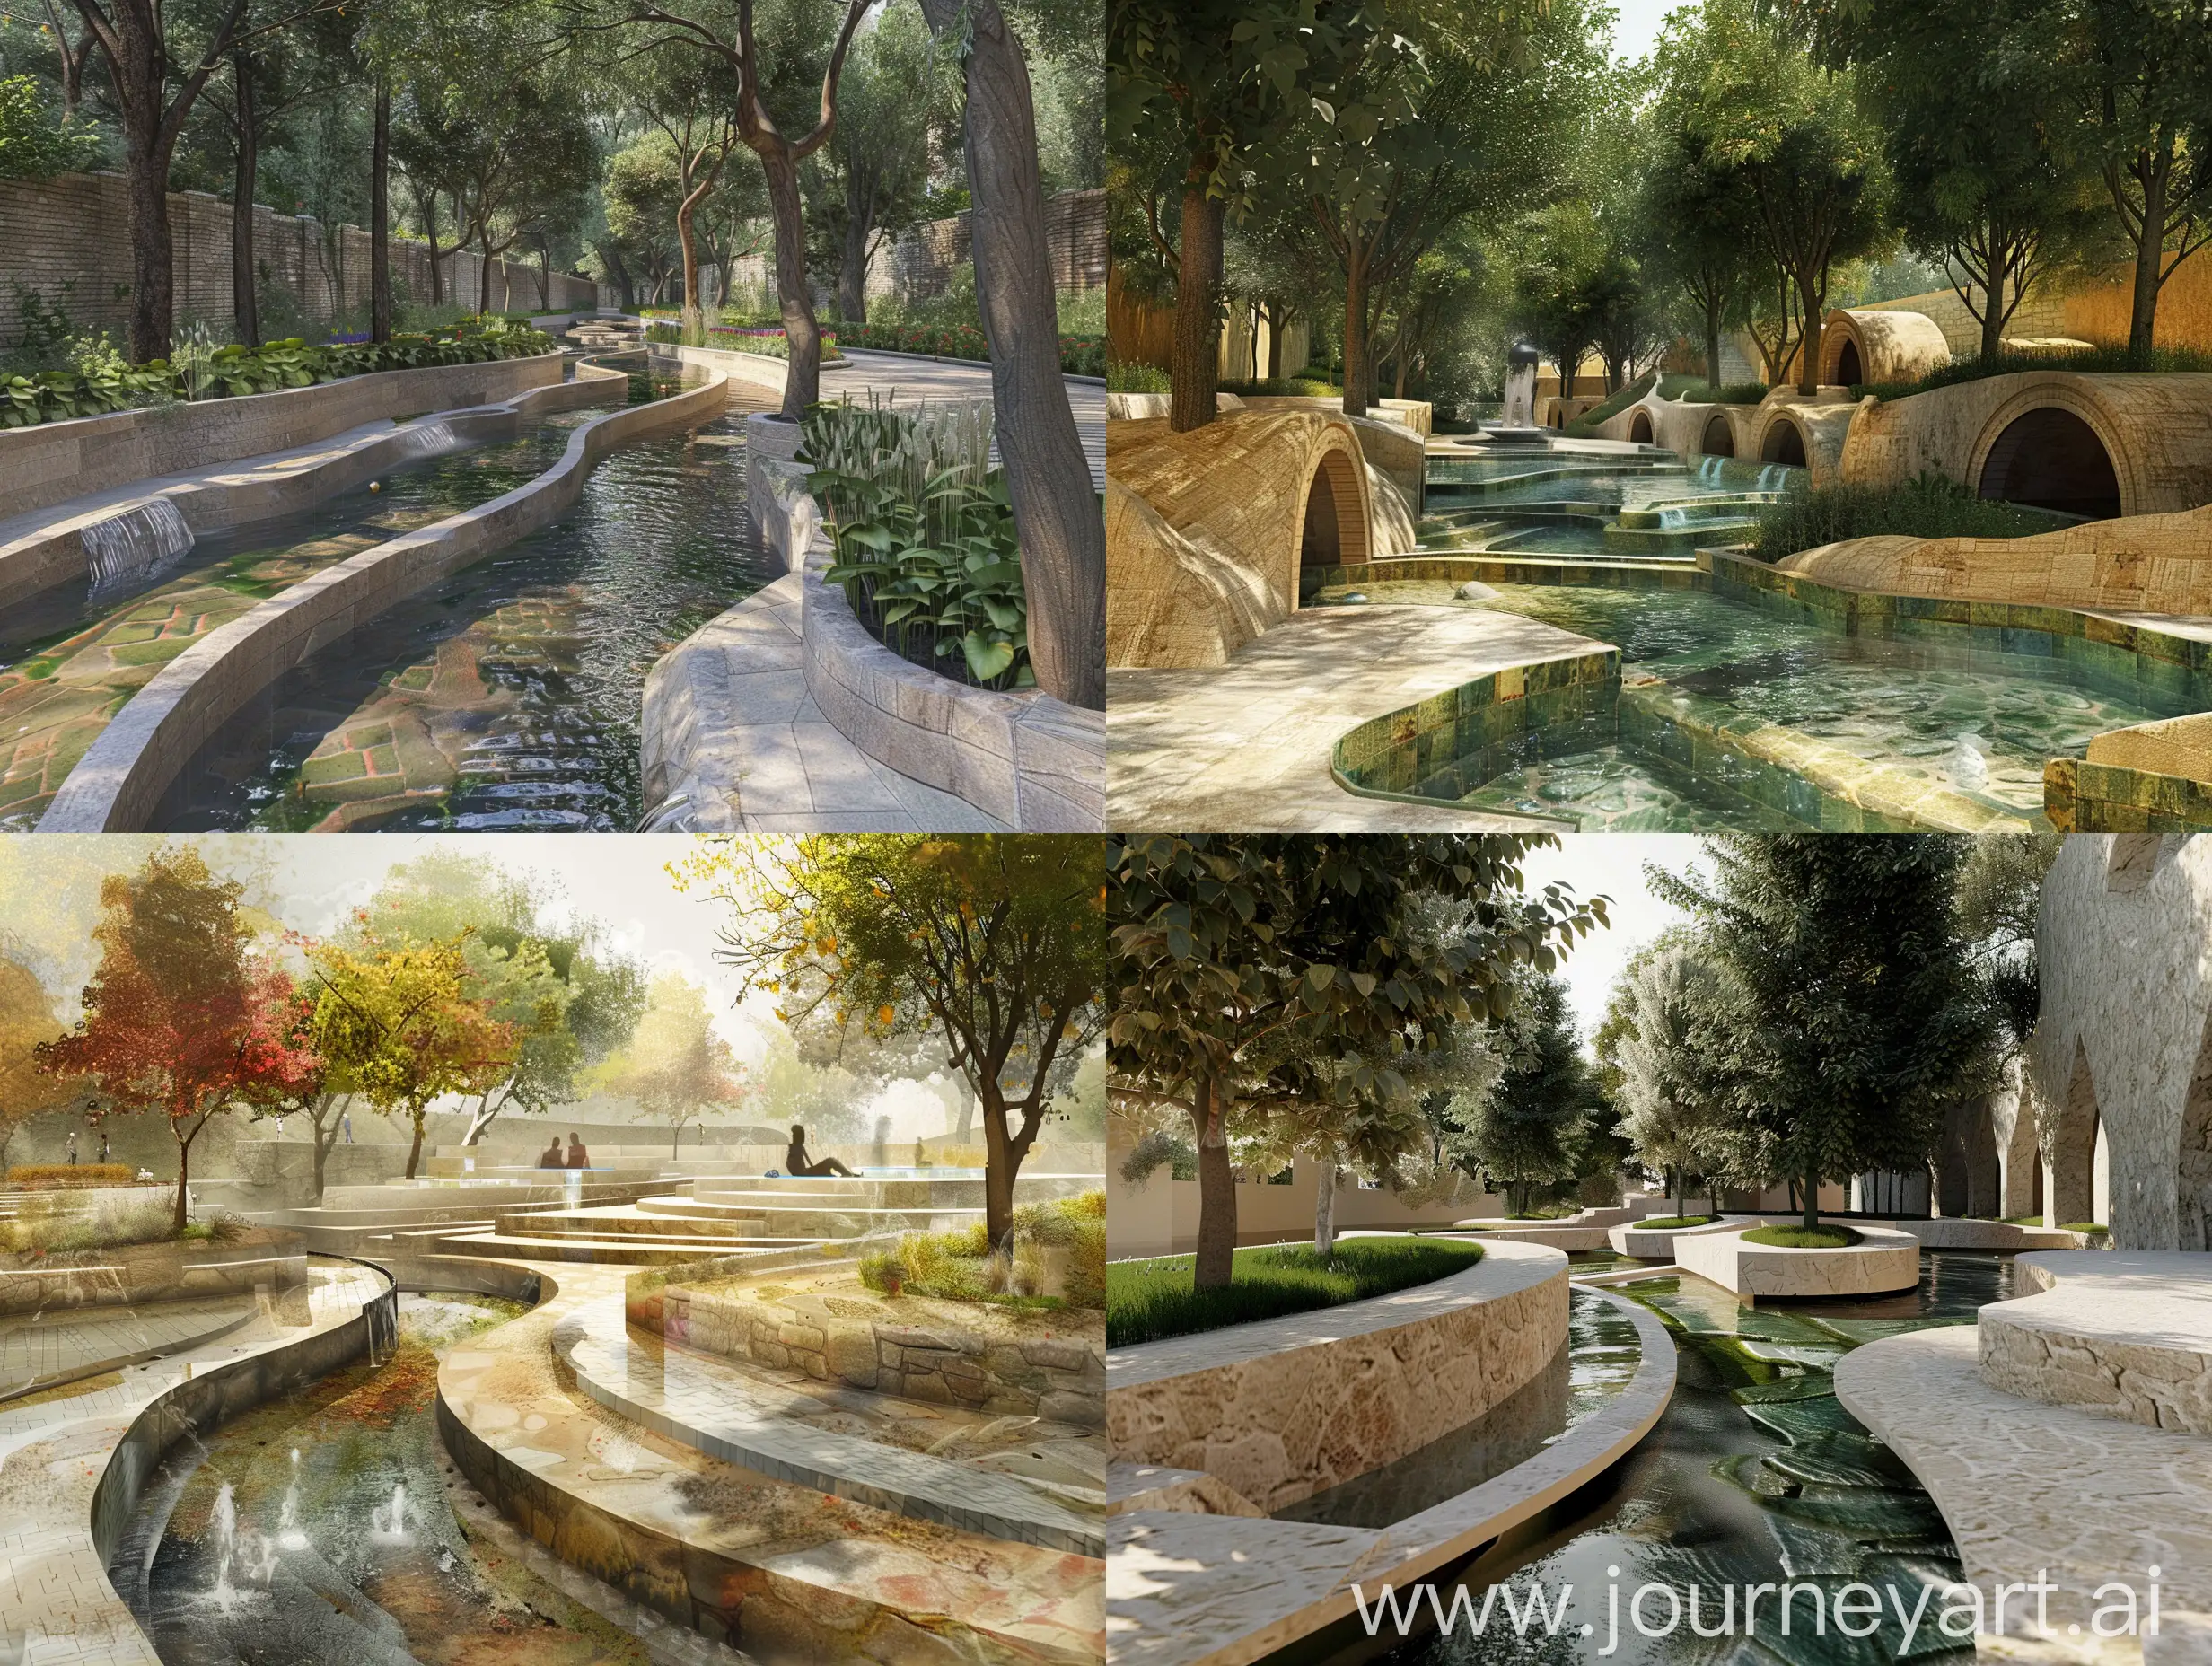 imagine Interactive Qanat Park:
Concept: An urban park inspired by traditional Persian Qanats, featuring interactive water channels and educational displays.
Details:
Form and Shape: Linear water channels with interactive elements.
Structure: Underground channels with visible sections.
Dimensions: Variable, fitting into existing park layouts.
Material: Stone, water-resistant materials.
Color: Natural stone colors.
Features: Interactive water pumps, educational plaques.
Location: Urban parks, educational campuses.
Design Style: Minimalist with historical elements.
Prompt: "Design an urban park inspired by traditional Persian Qanats, featuring interactive water channels and educational displays. The design should use stone and water-resistant materials in natural colors, with a minimalist style incorporating historical elements. Suitable for urban parks and educational campuses."